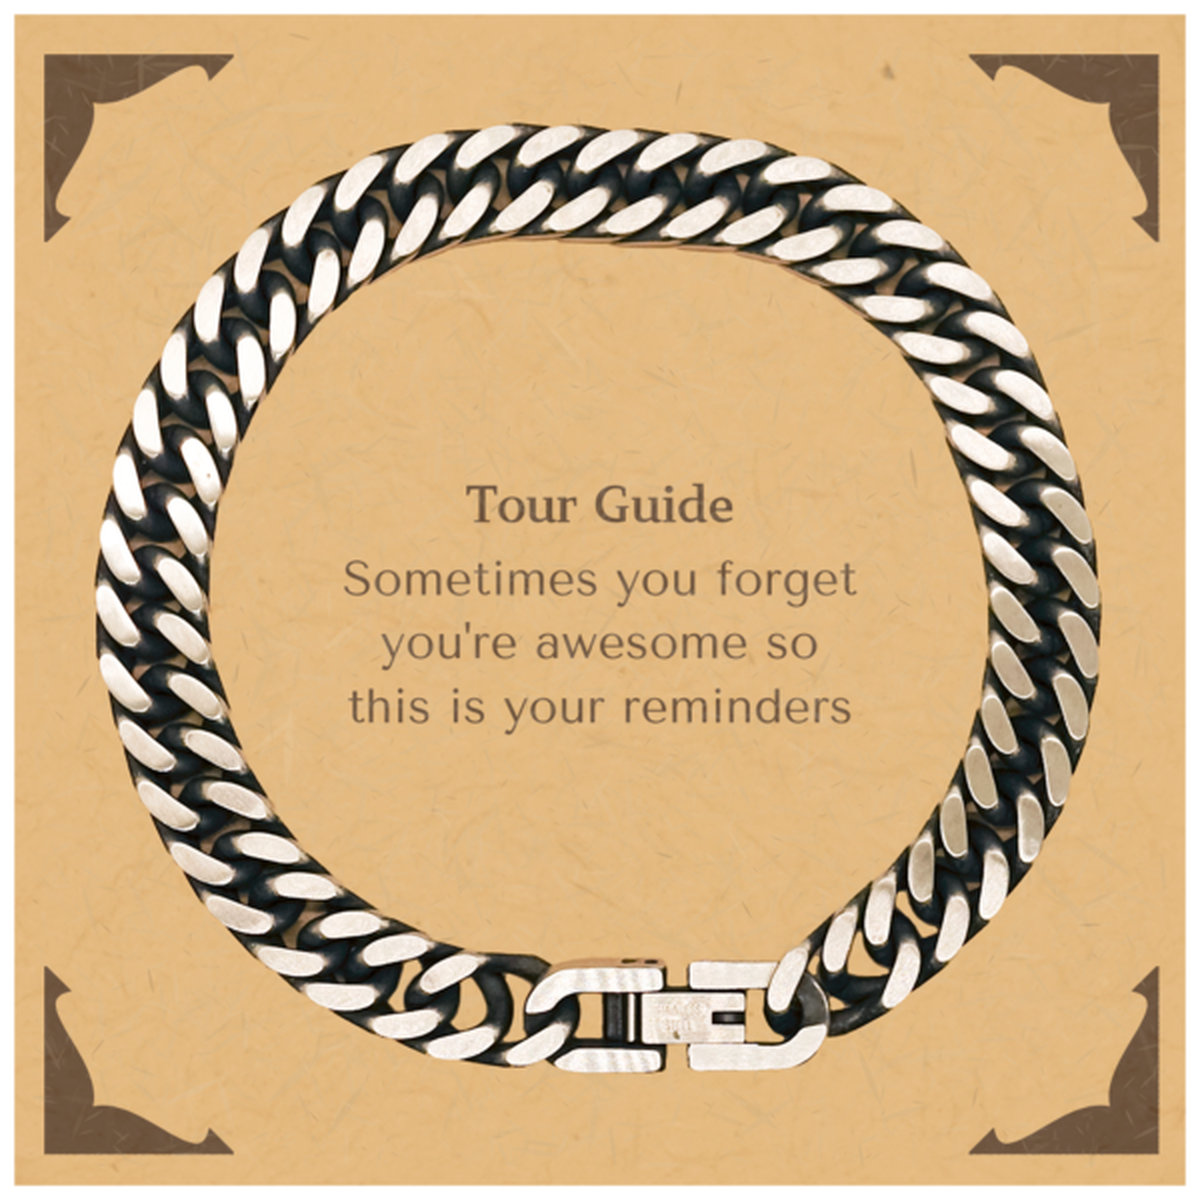 Sentimental Tour Guide Cuban Link Chain Bracelet, Tour Guide Sometimes you forget you're awesome so this is your reminders, Graduation Christmas Birthday Gifts for Tour Guide, Men, Women, Coworkers